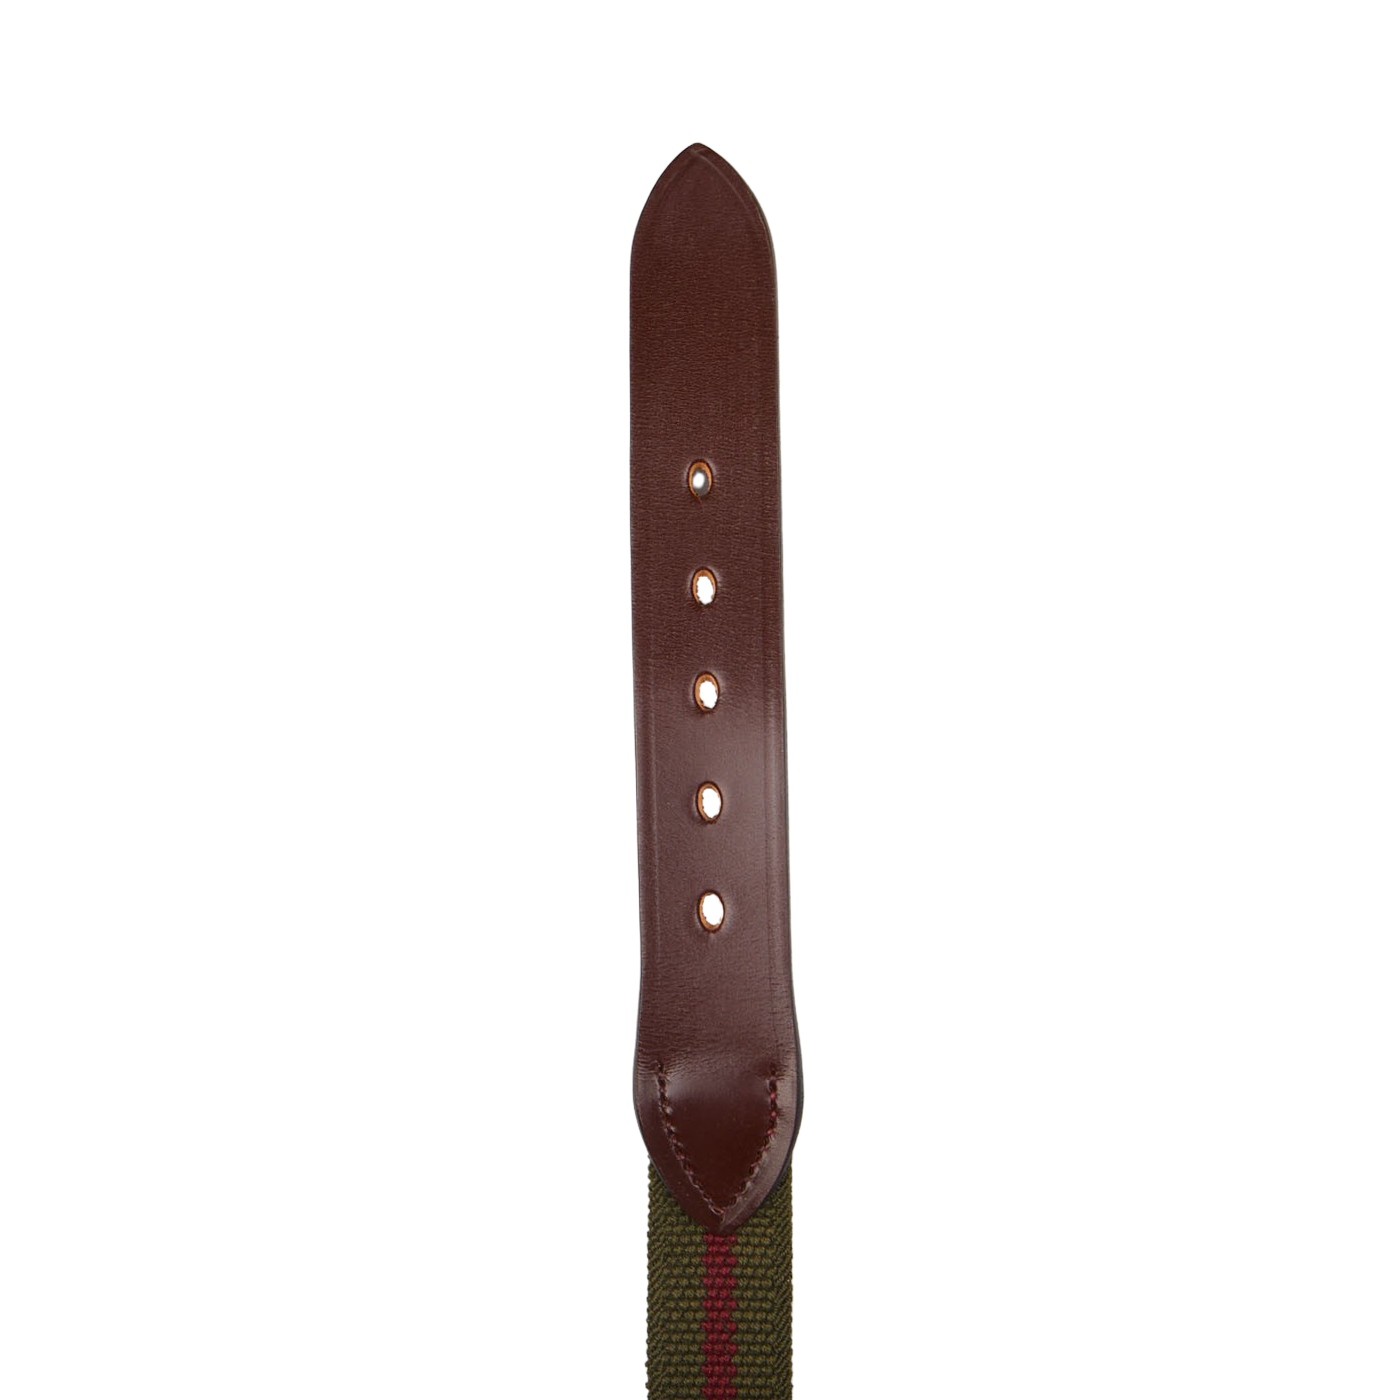 Handmade in England, this Green Striped Canvas Burgundy Leather 35mm Belt by Hardy & Parsons features green and brown stripes to create a stylish accessory.